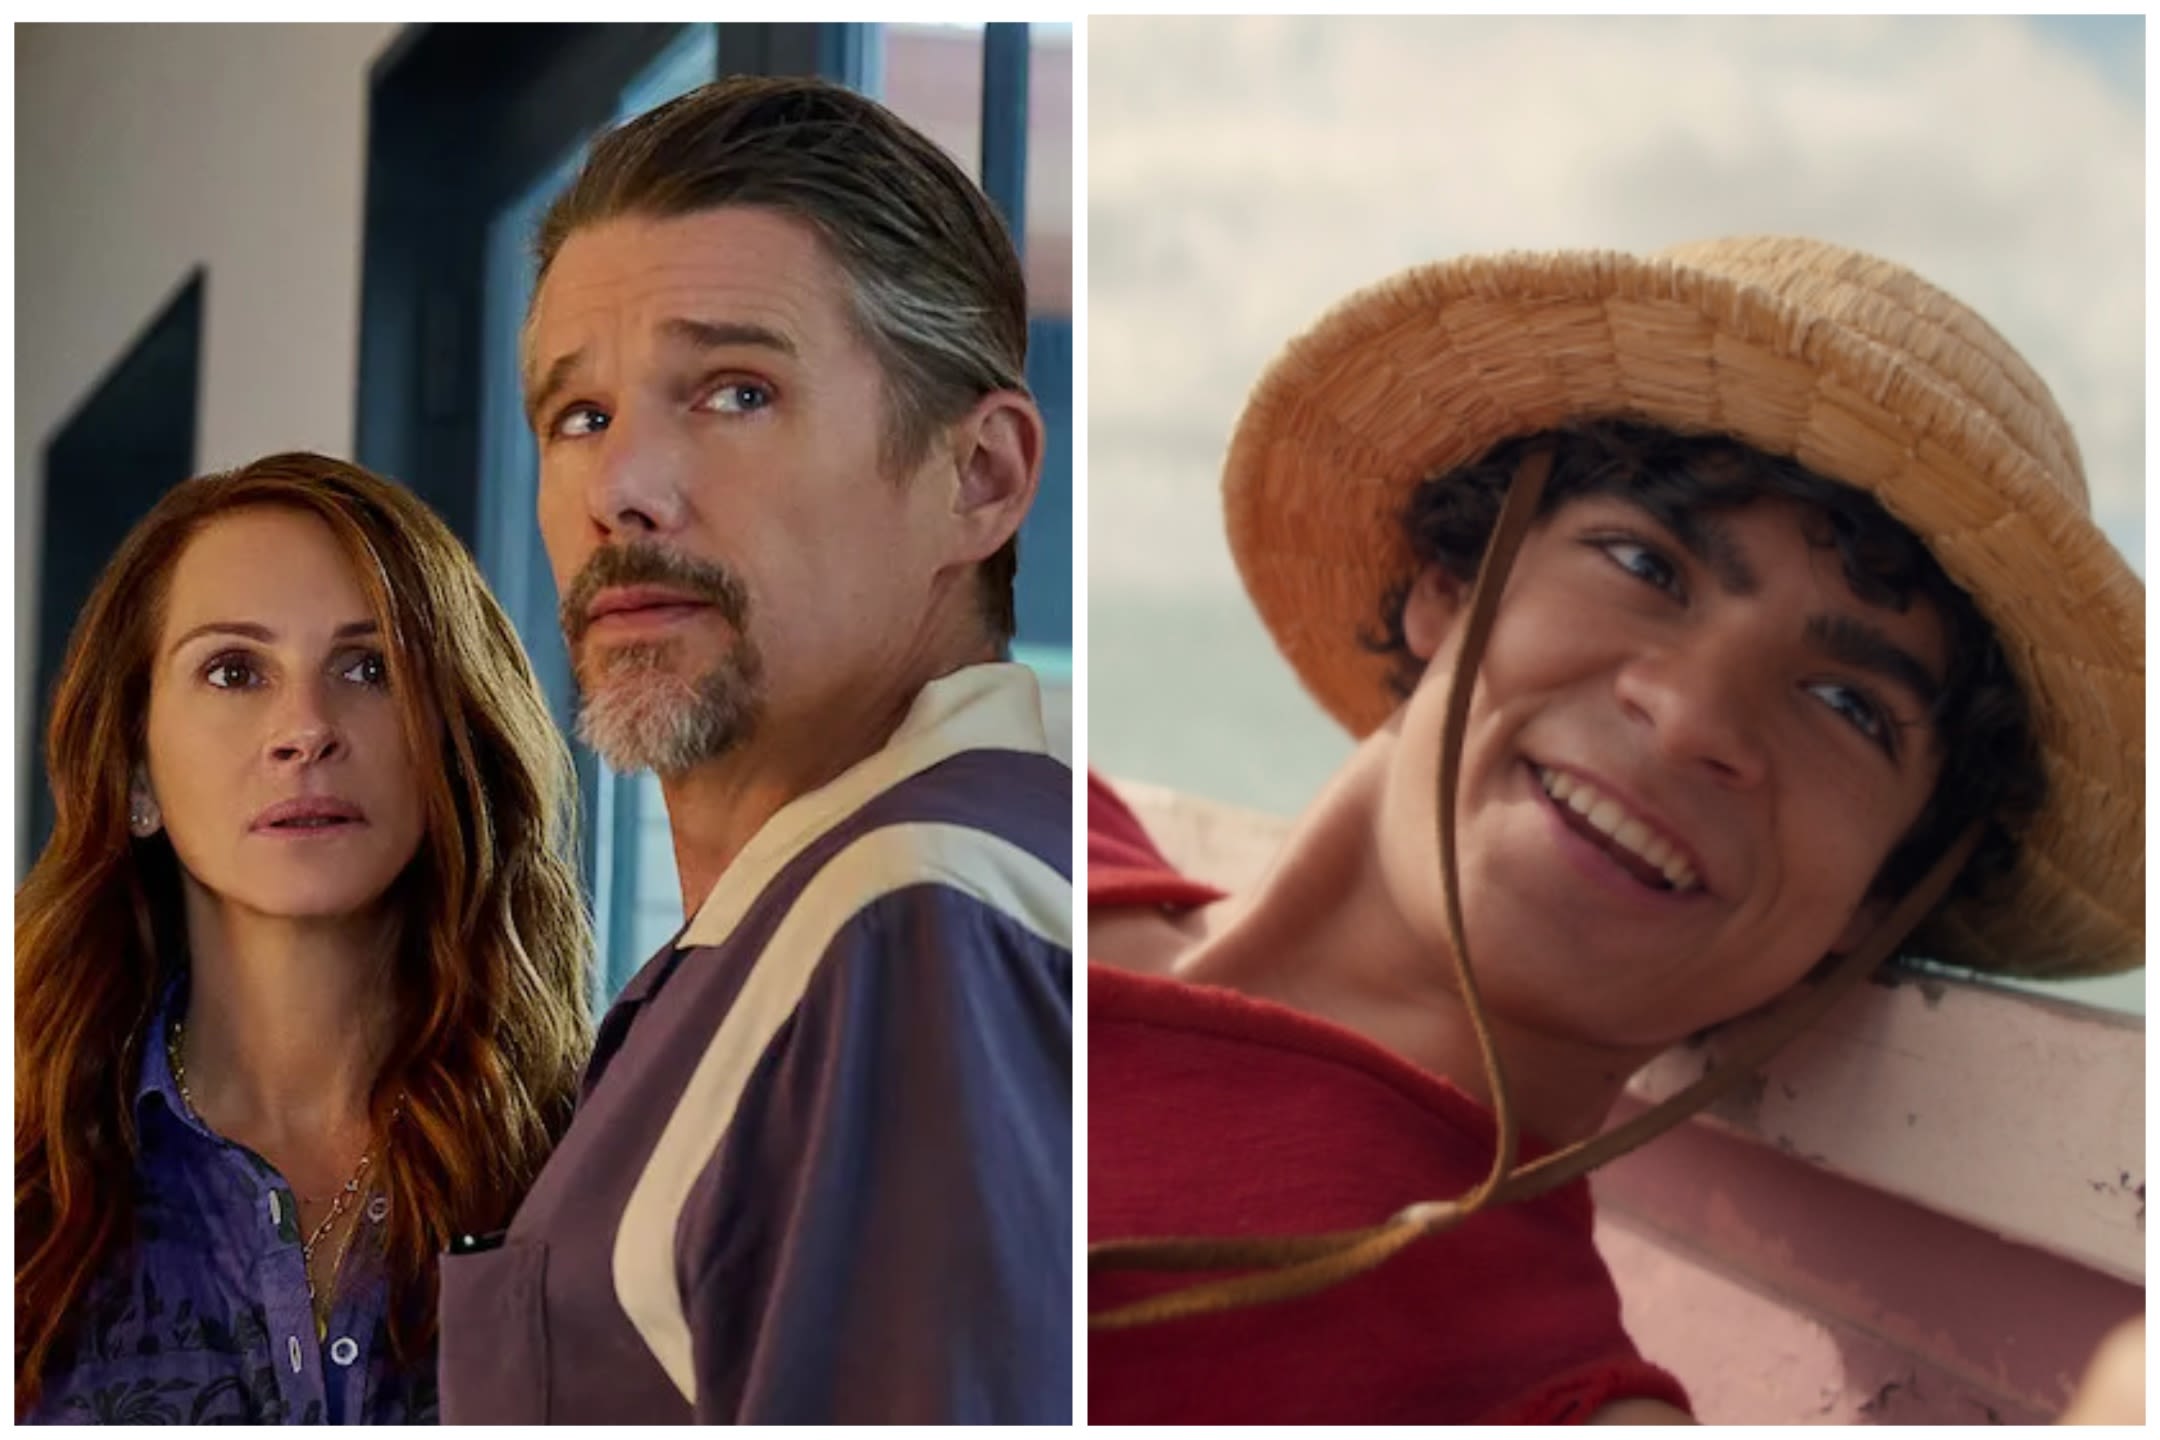 ‘Leave the World Behind’ Tops All Netflix Viewing... Views, ‘One Piece’ Leads TV With 71.6 Million Views